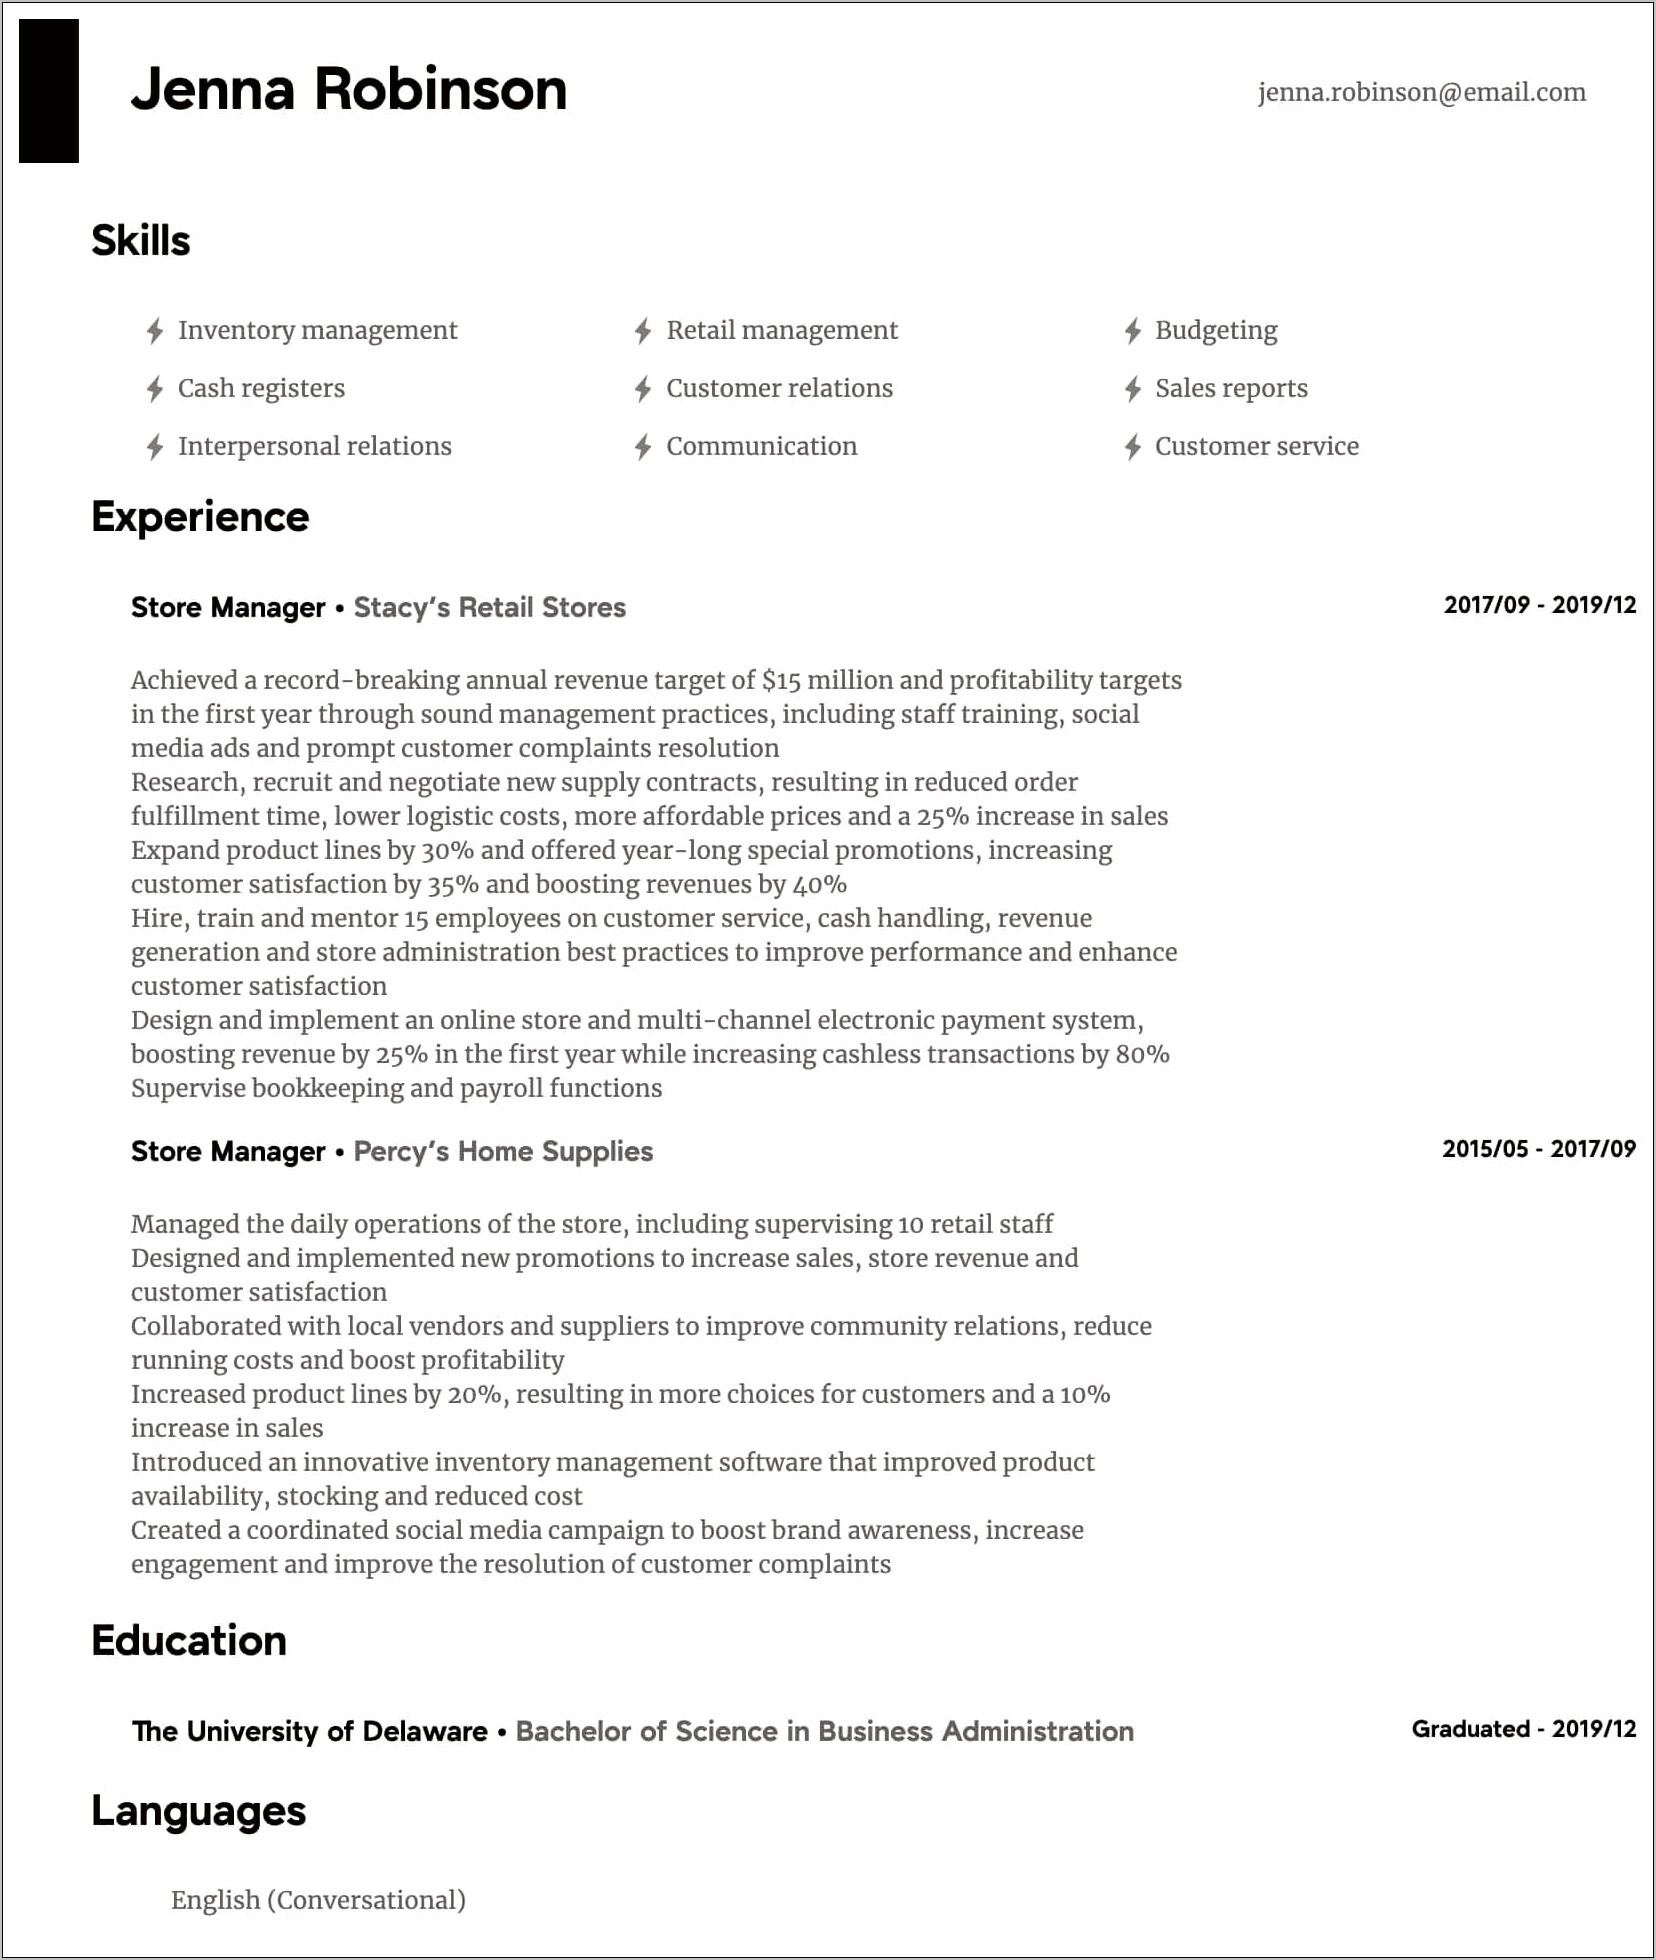 Clothing Store Manager Resume Example